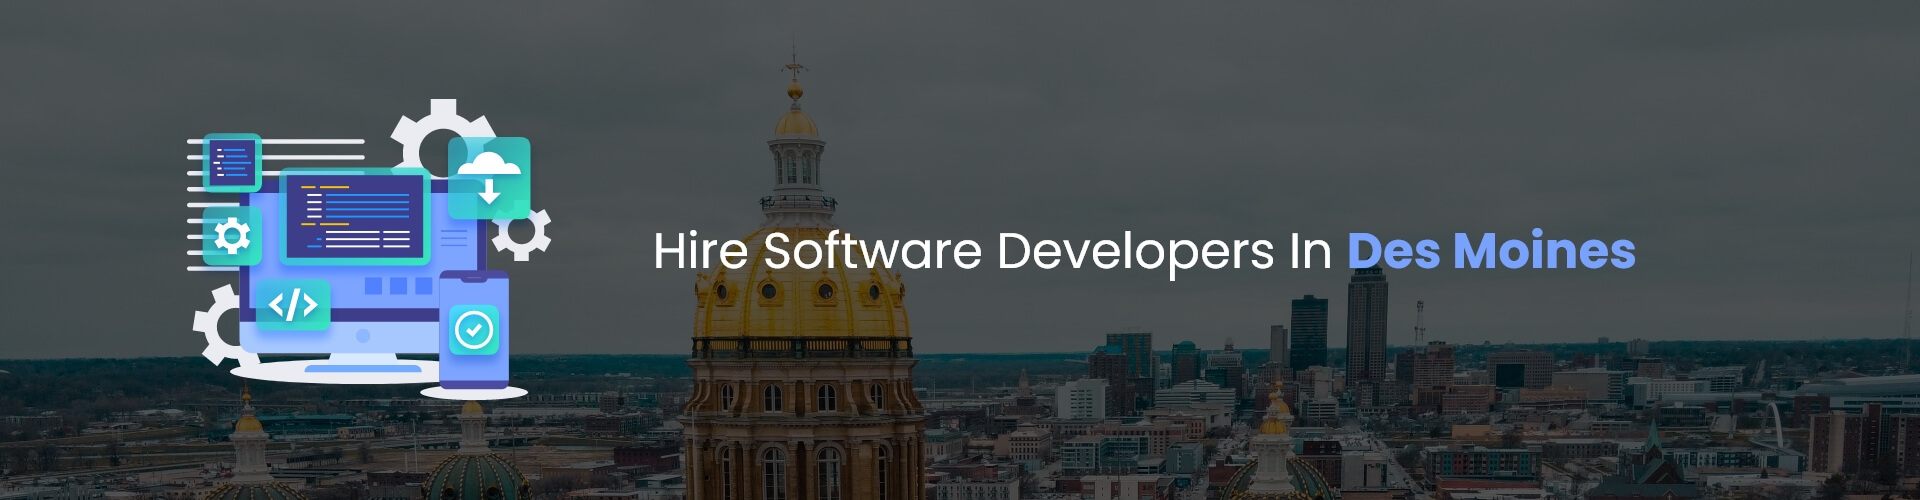 hire software developers in des moines